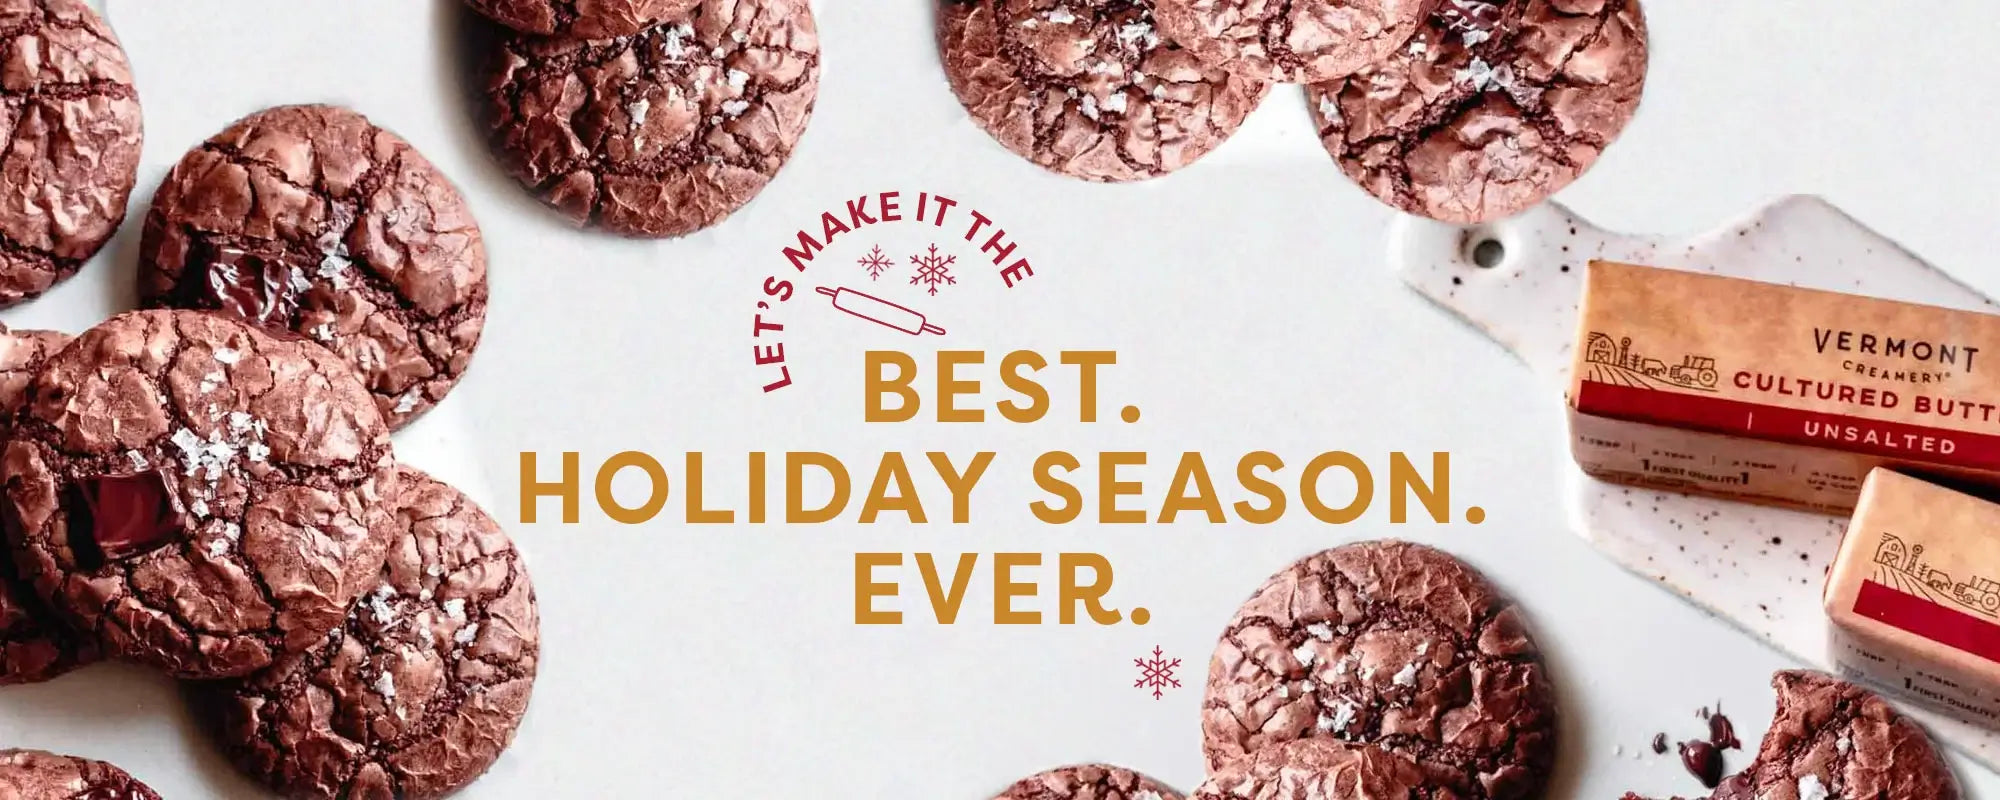 Vermont Creamery | Let's Make the Best Holiday Season Ever